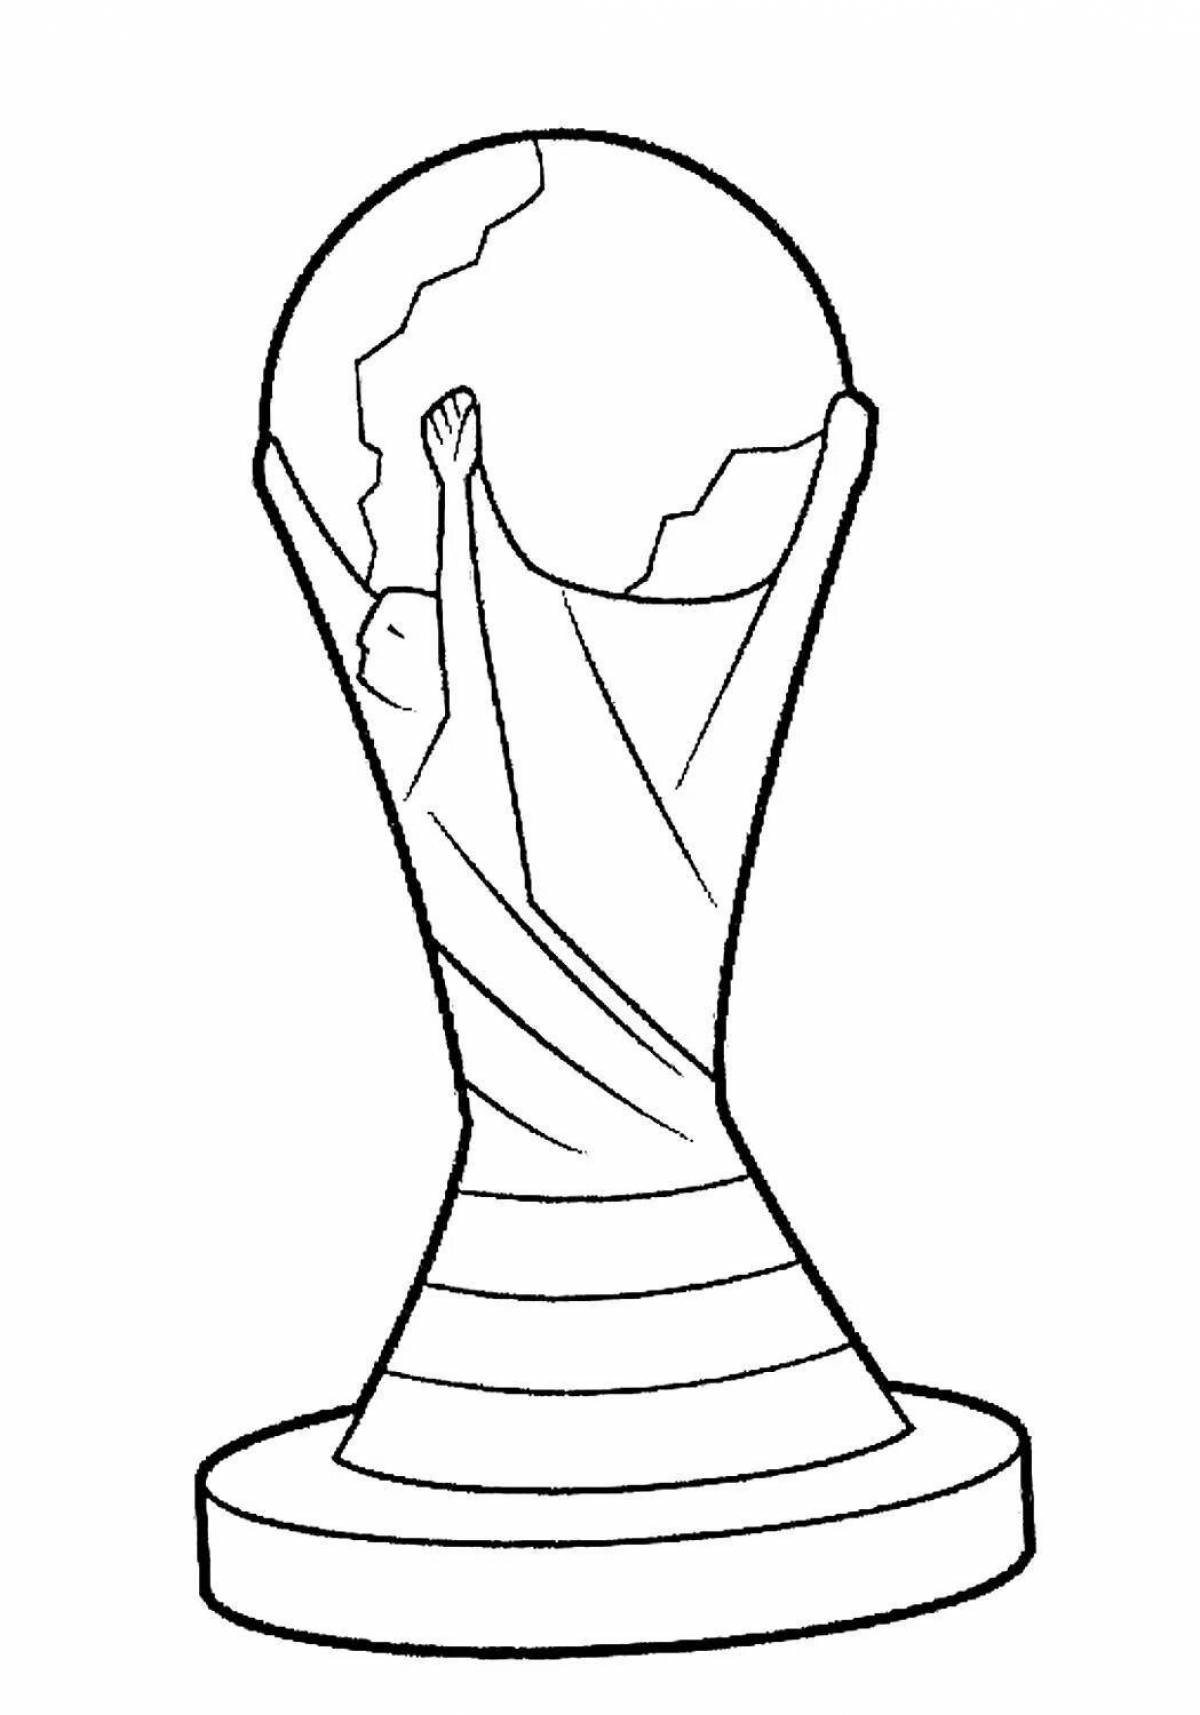 Color-frenzy world cup coloring page